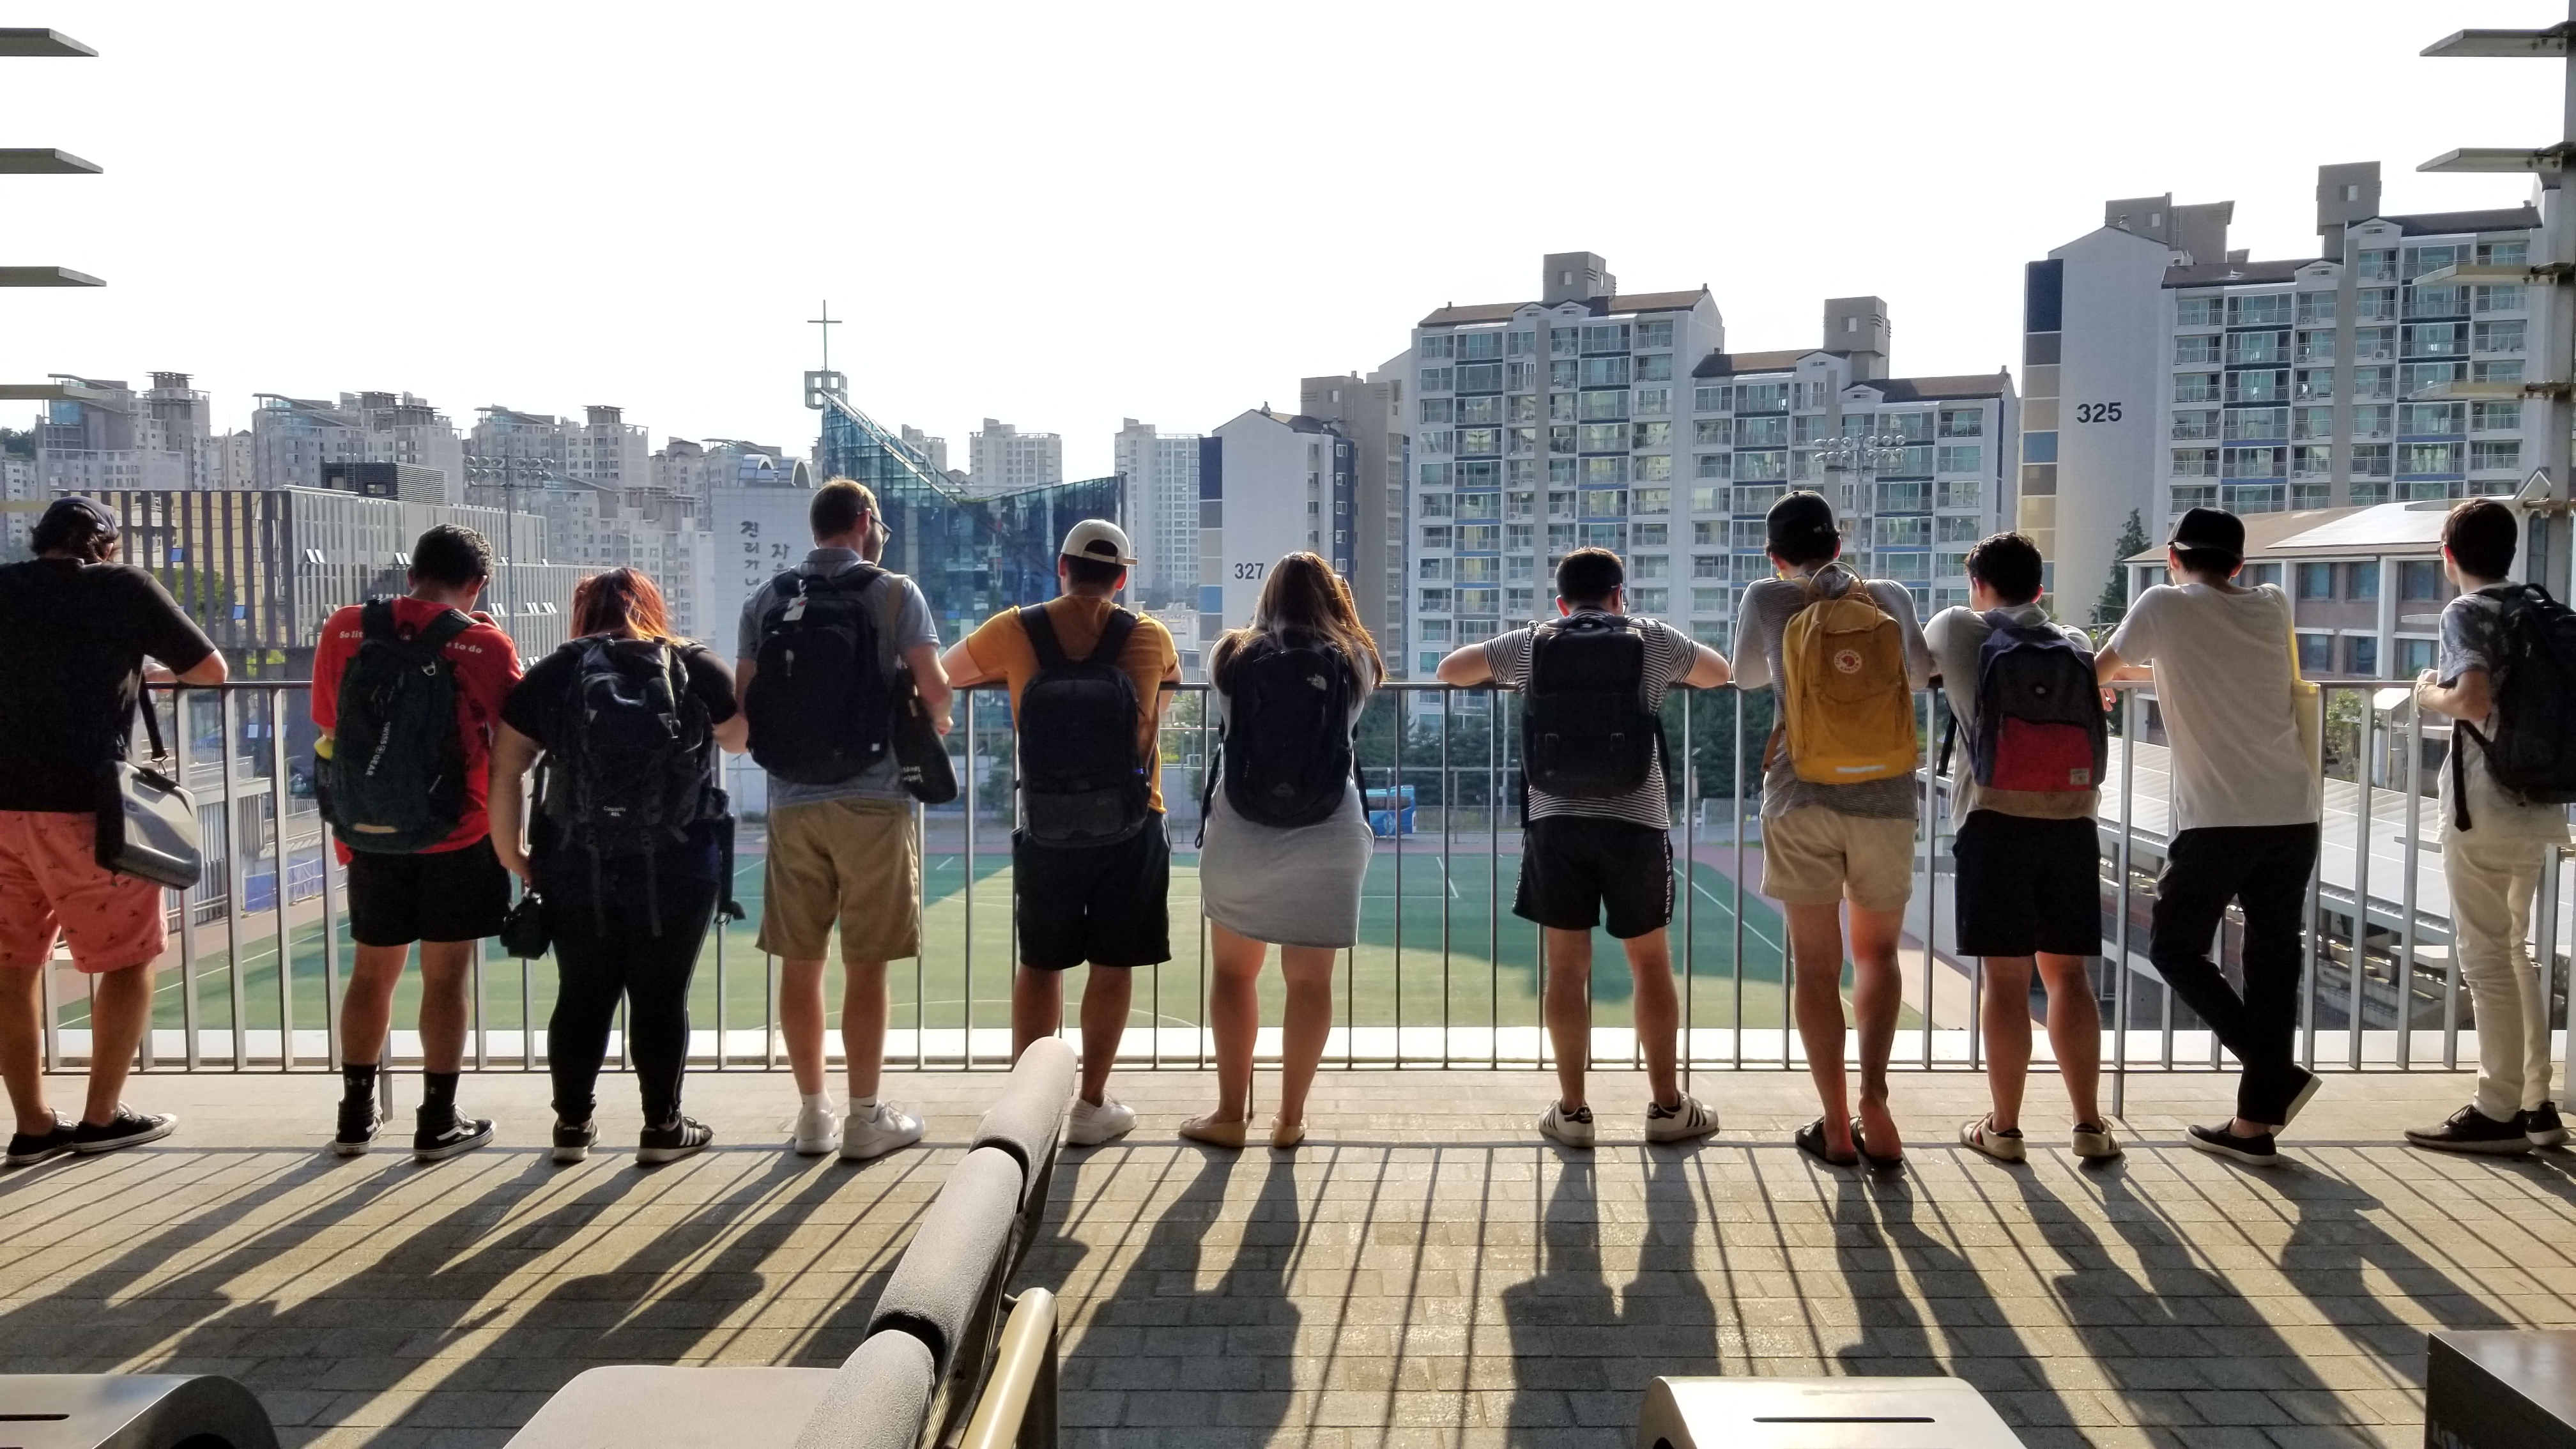 Students overlooking grassy court in South Korea.